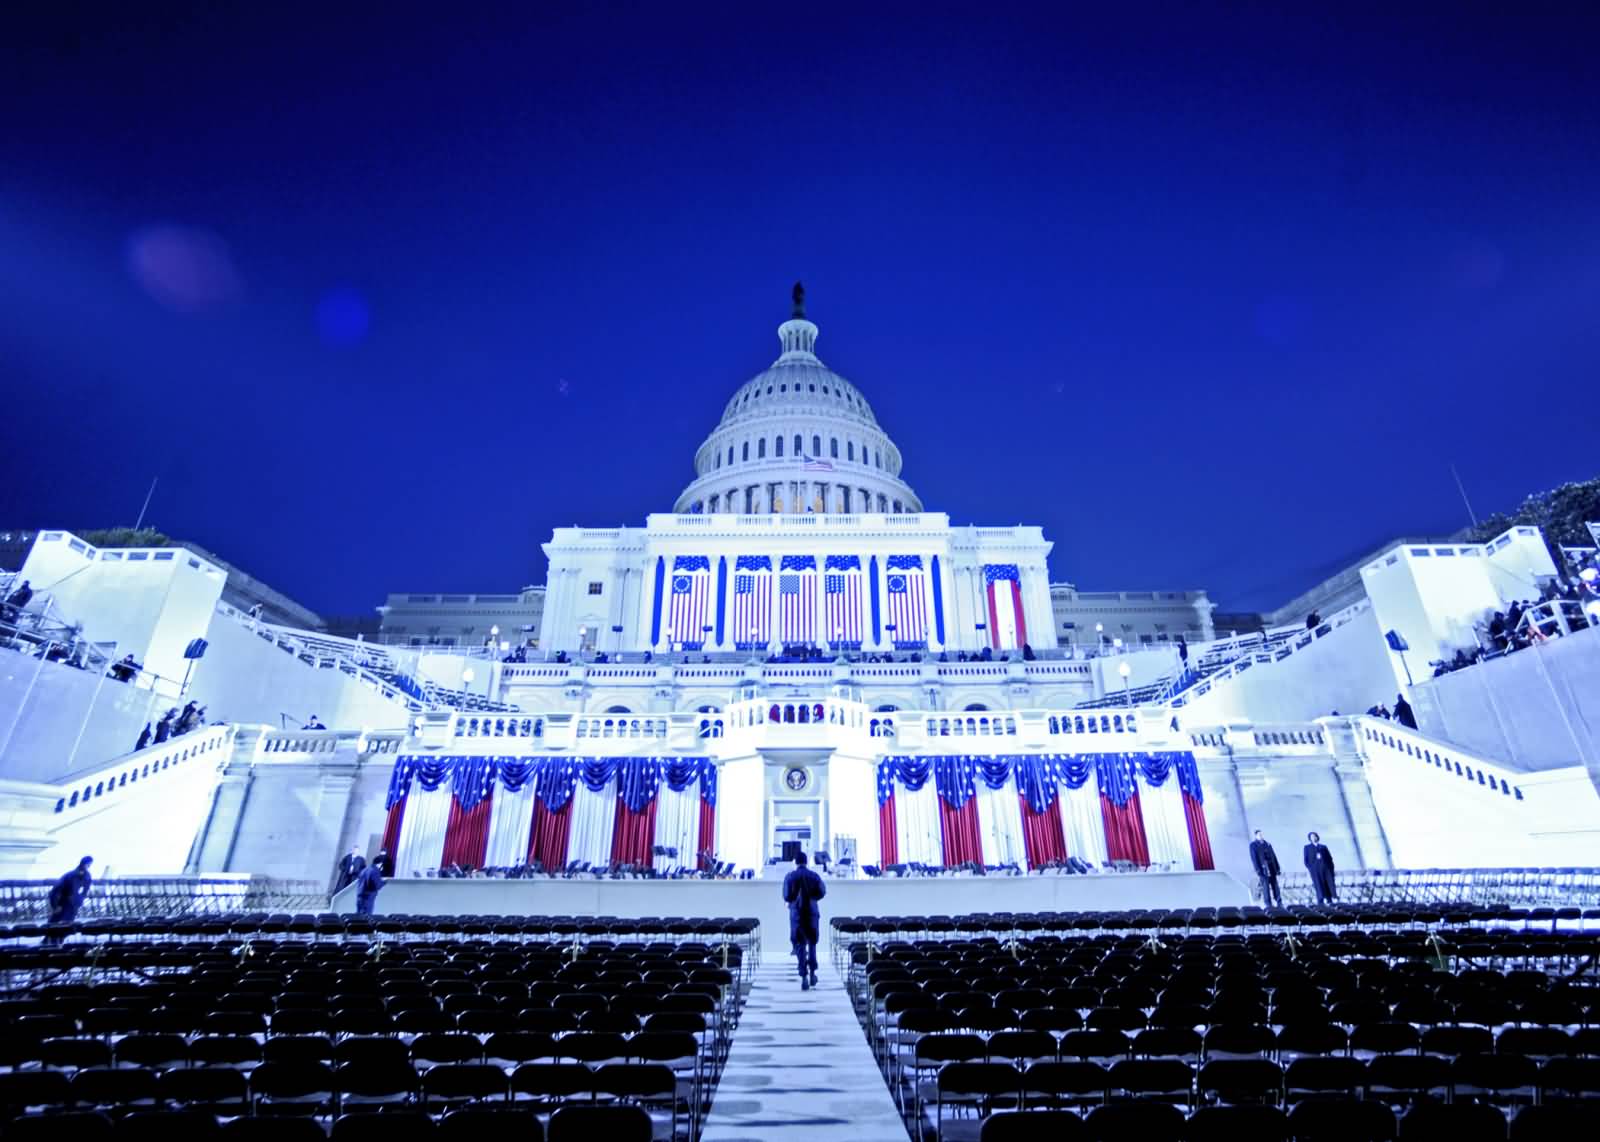 United States Capitol Inauguration Function At Night